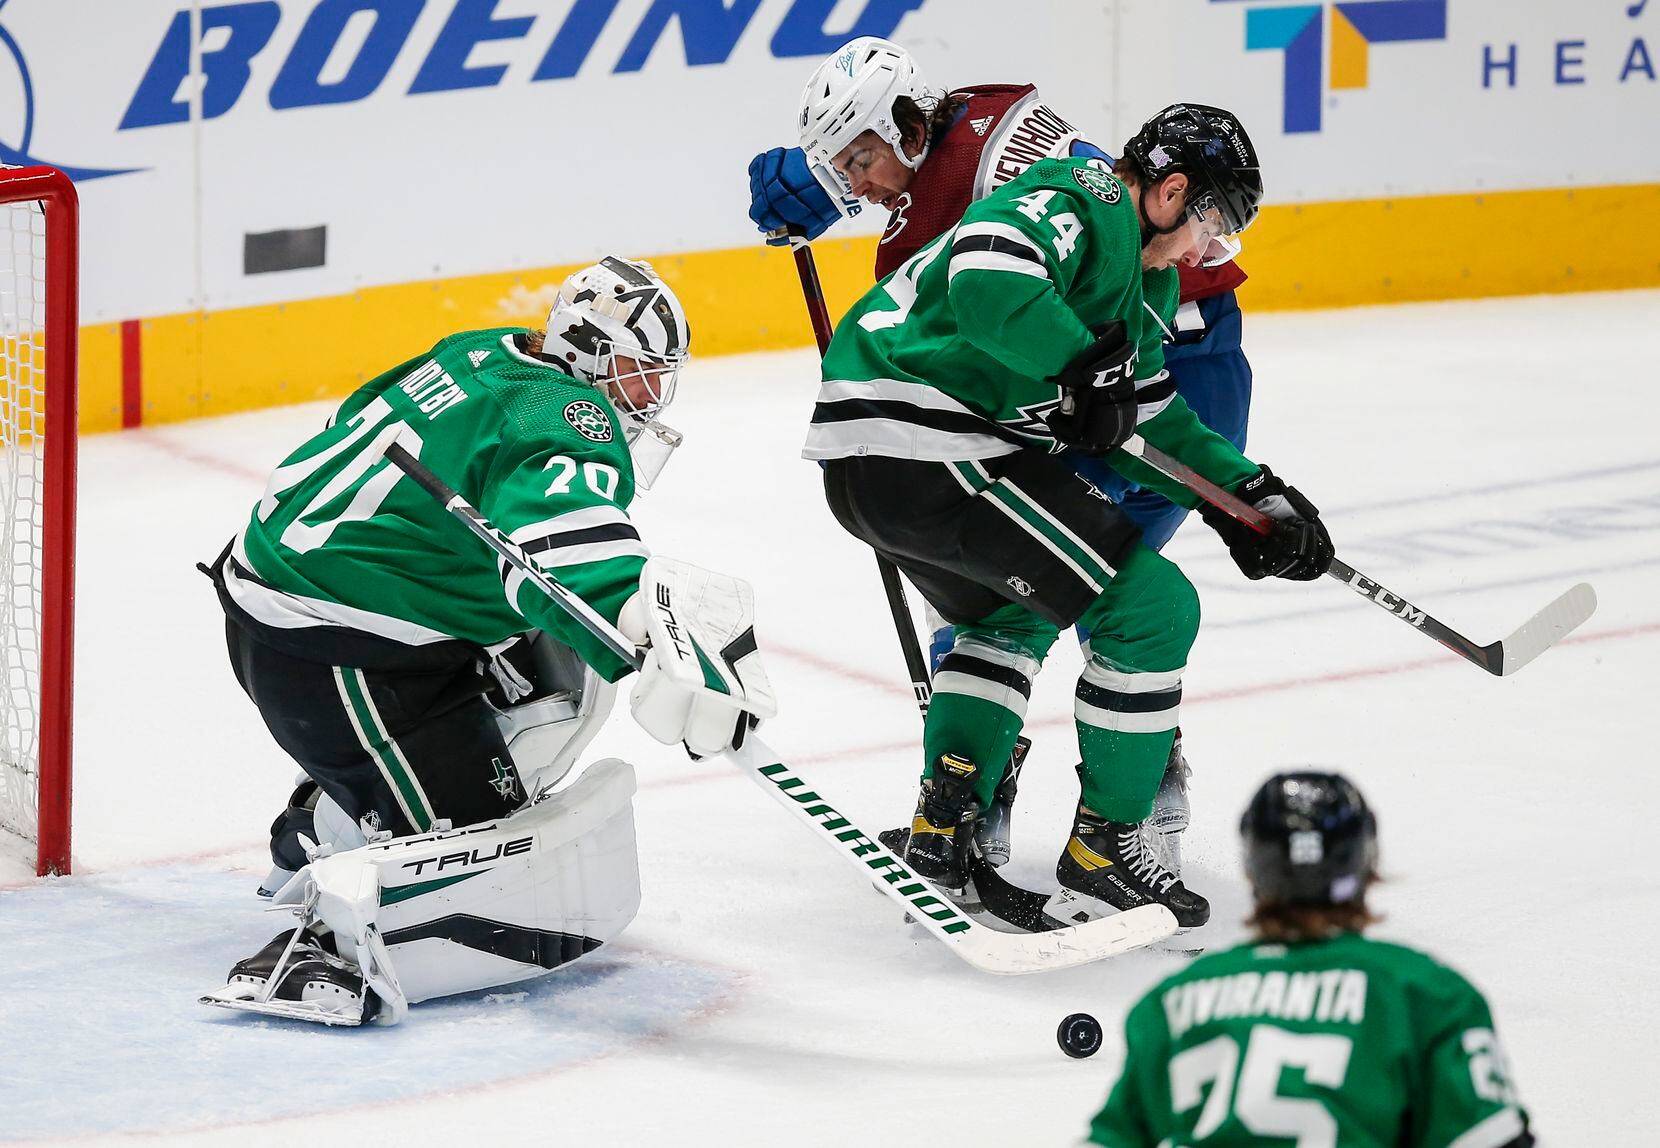 Dallas Stars goaltender Braden Holtby (70) plays the puck away as  defenseman Joel Hanley (44) battles Colorado Avalanche forward Alex Newhook (18) for space during the second period of an NHL hockey game in Dallas, Friday, November 26, 2021. (Brandon Wade/Special Contributor)